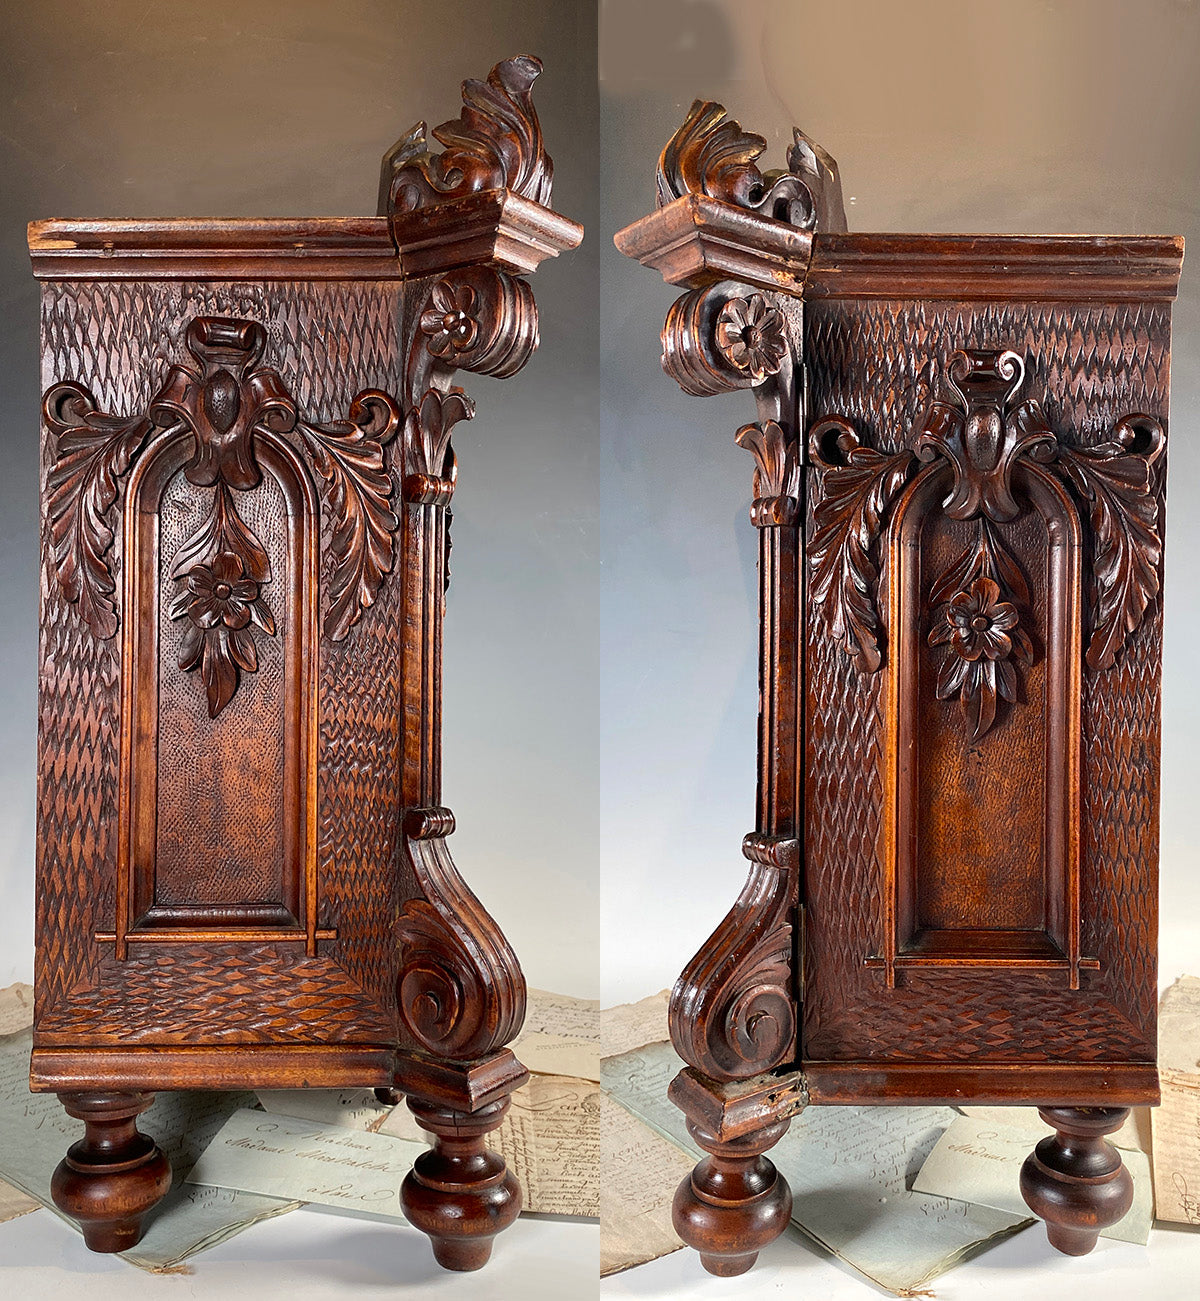 Fabulous Large 23.5" Hand Carved French or Black Forest Cigar Cabinet, Chest, 10 Trays Hold 120 Cigars